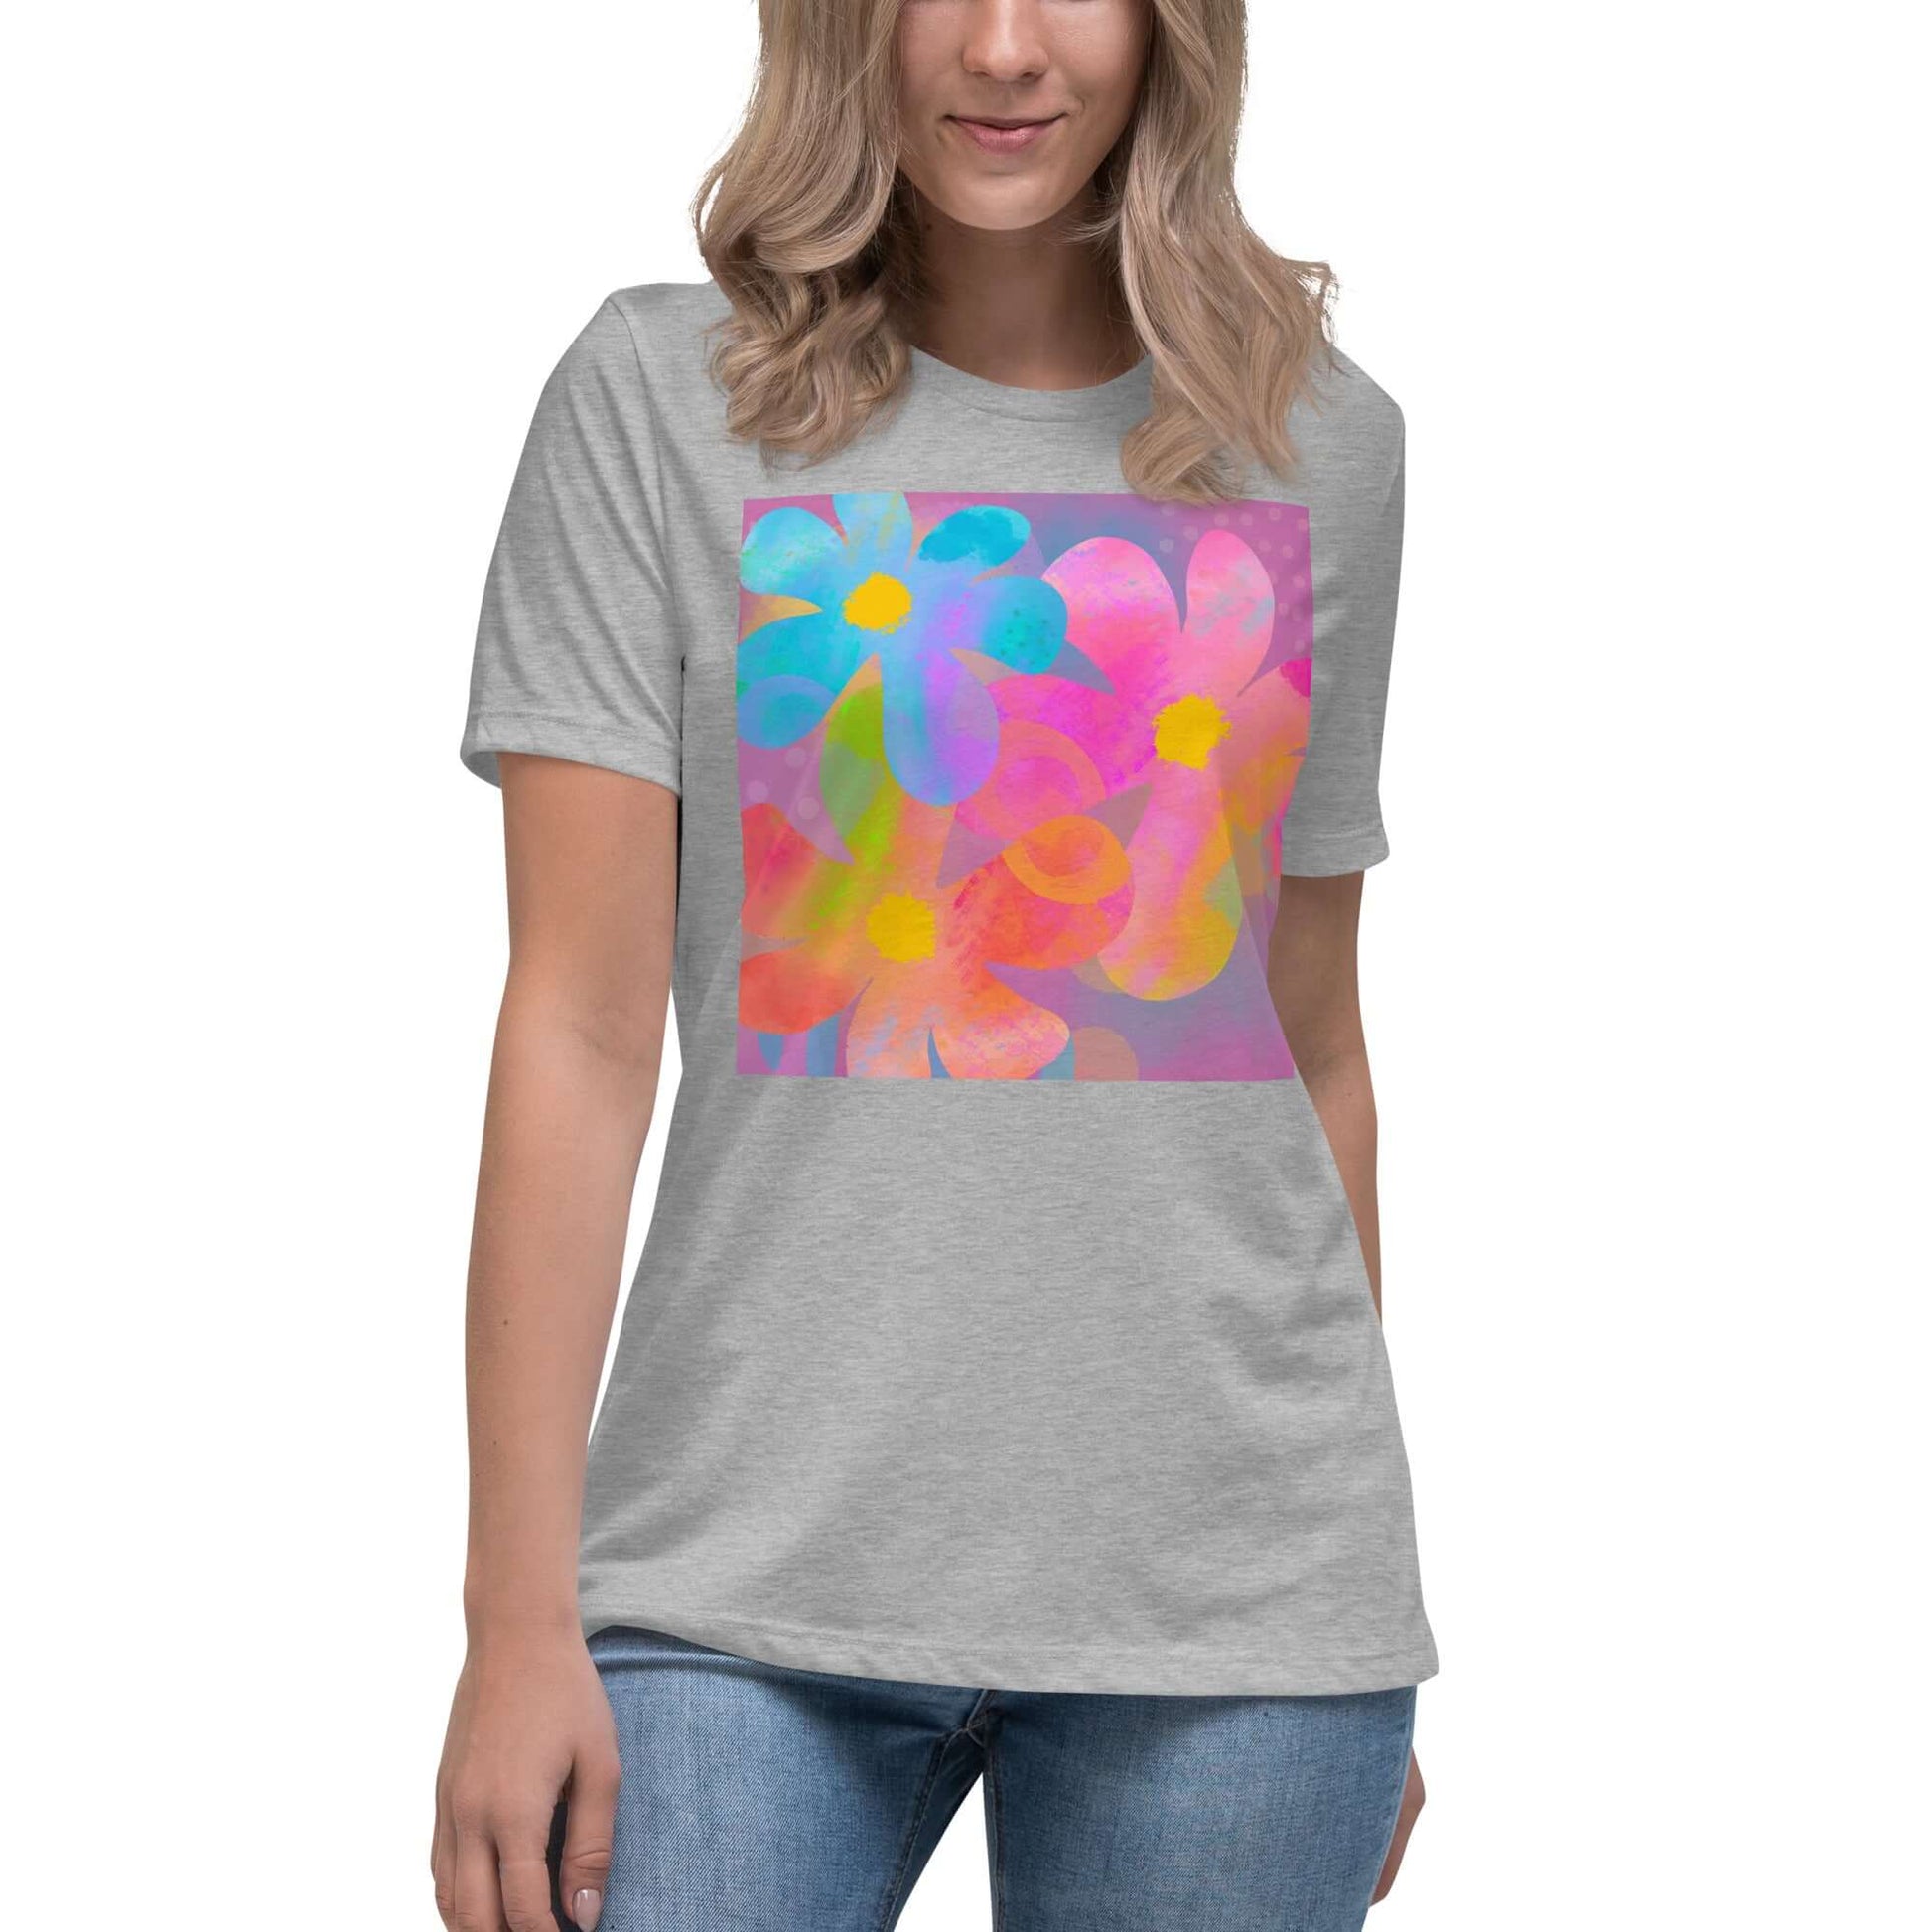 Big Colorful 1960s Psychedelic “Hippie Flowers” Women’s Short Sleeve Tee in Athletic Heather Gray